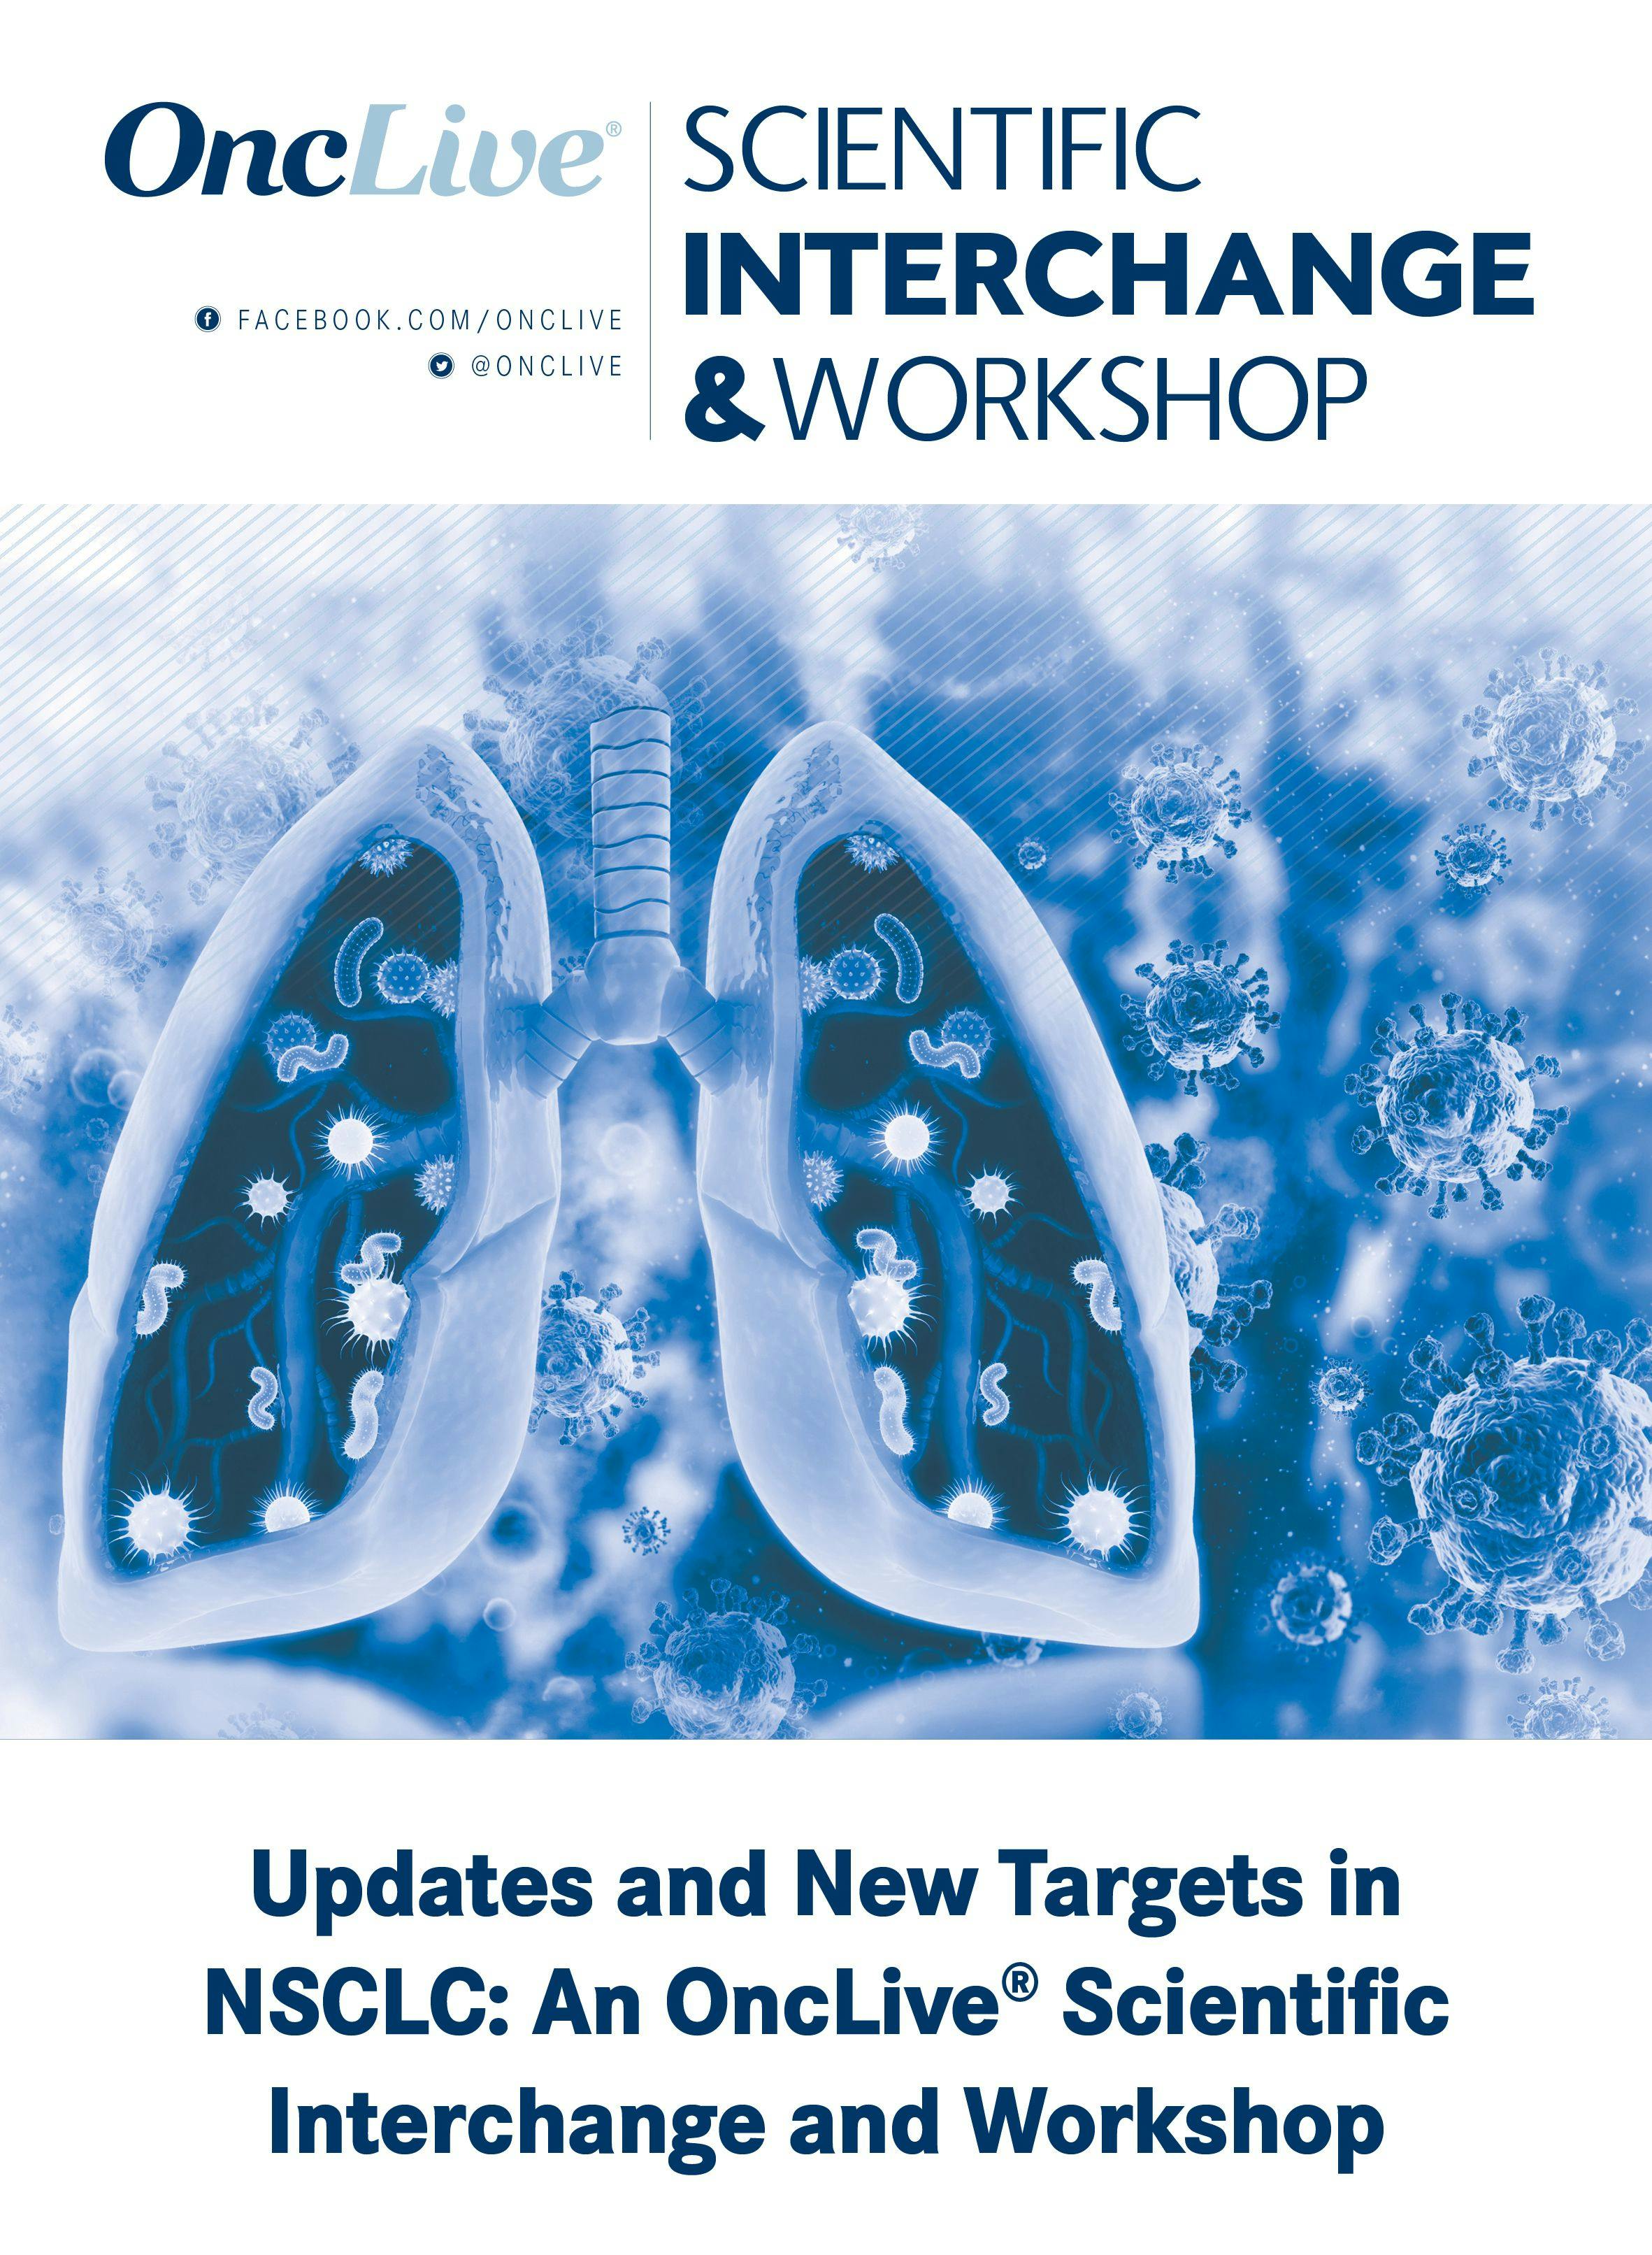 Updates and New Targets in NSCLC: An OncLive® Scientific Interchange and Workshop